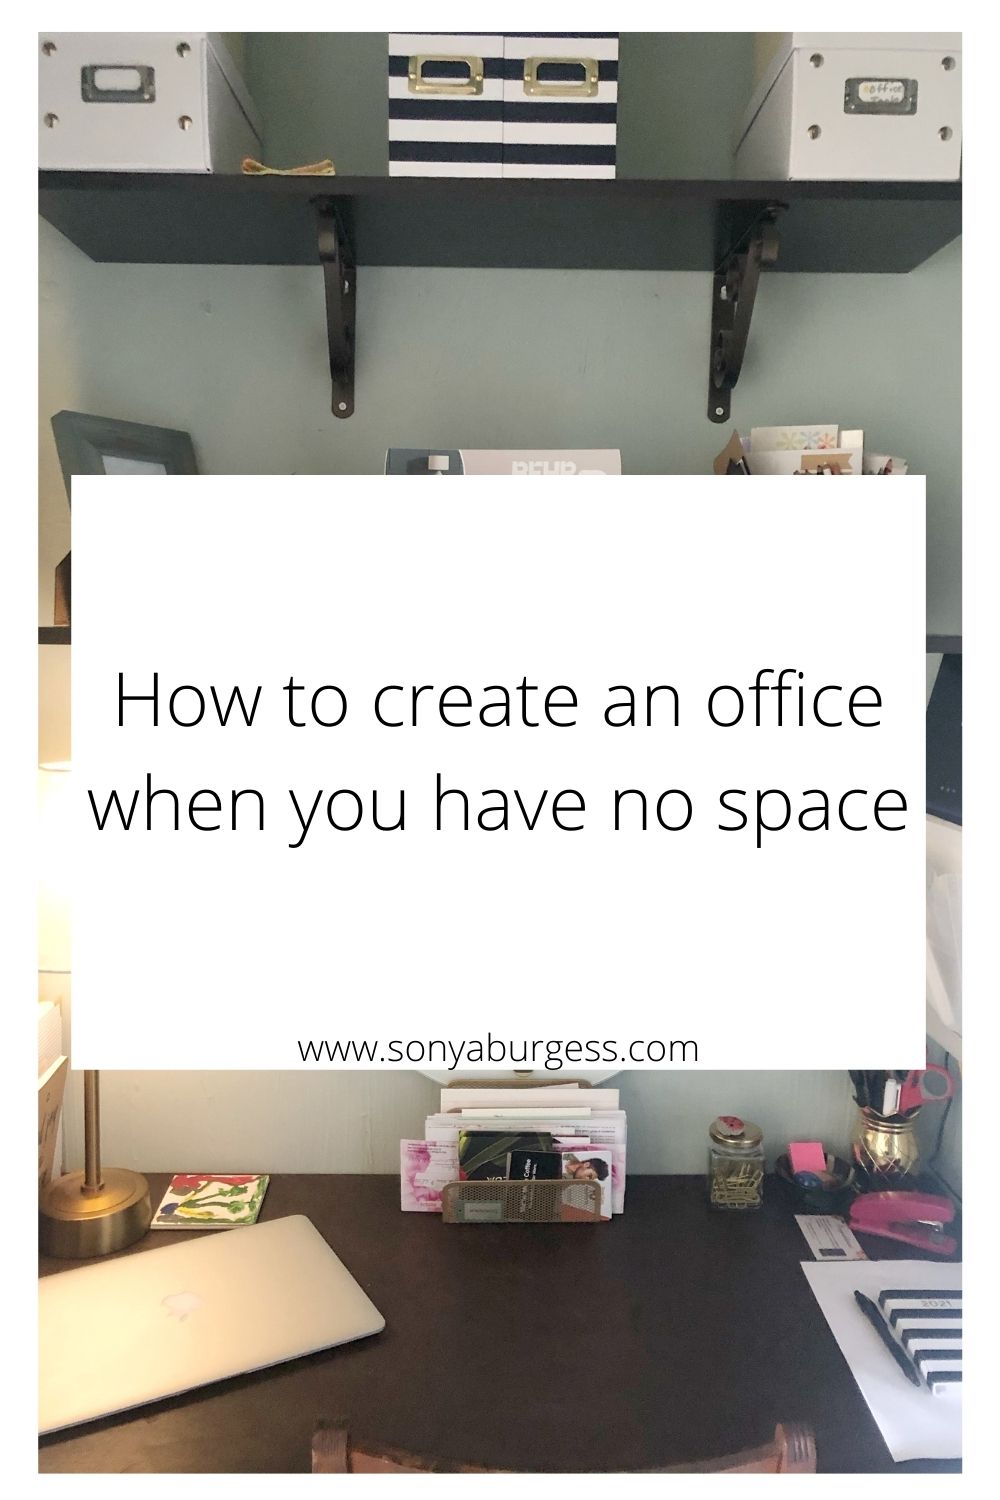 How to create an office when you have no space.